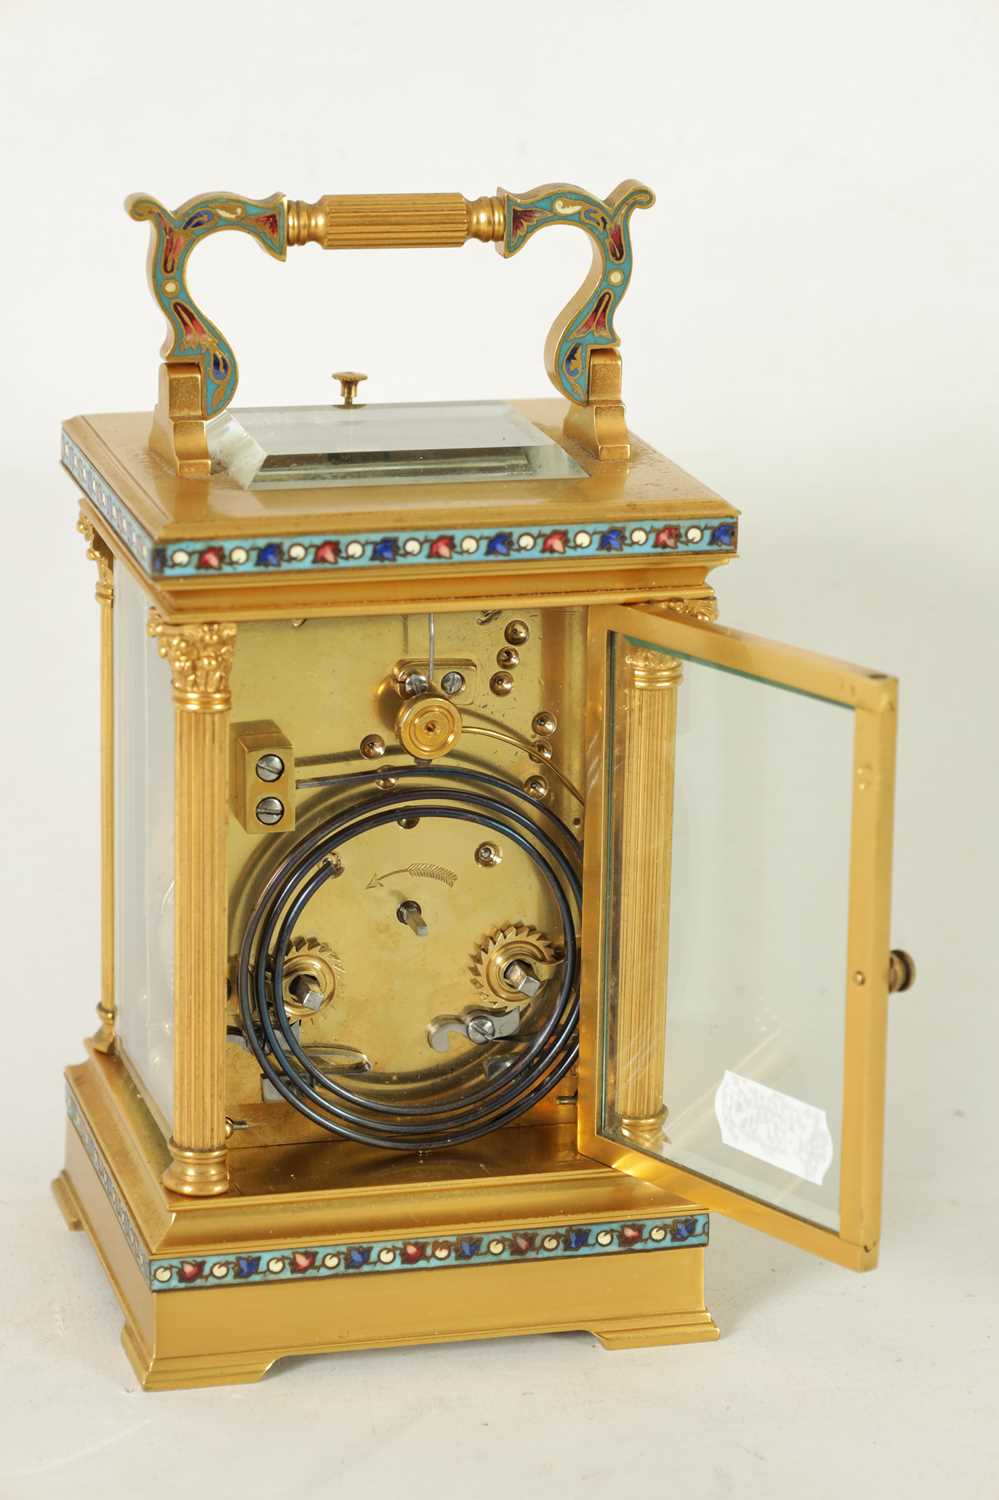 A LATE 19TH CENTURY FRENCH GILT BRASS AND CHAMPLEVE ENAMEL REPEATING CARRIAGE CLOCK - Image 9 of 10